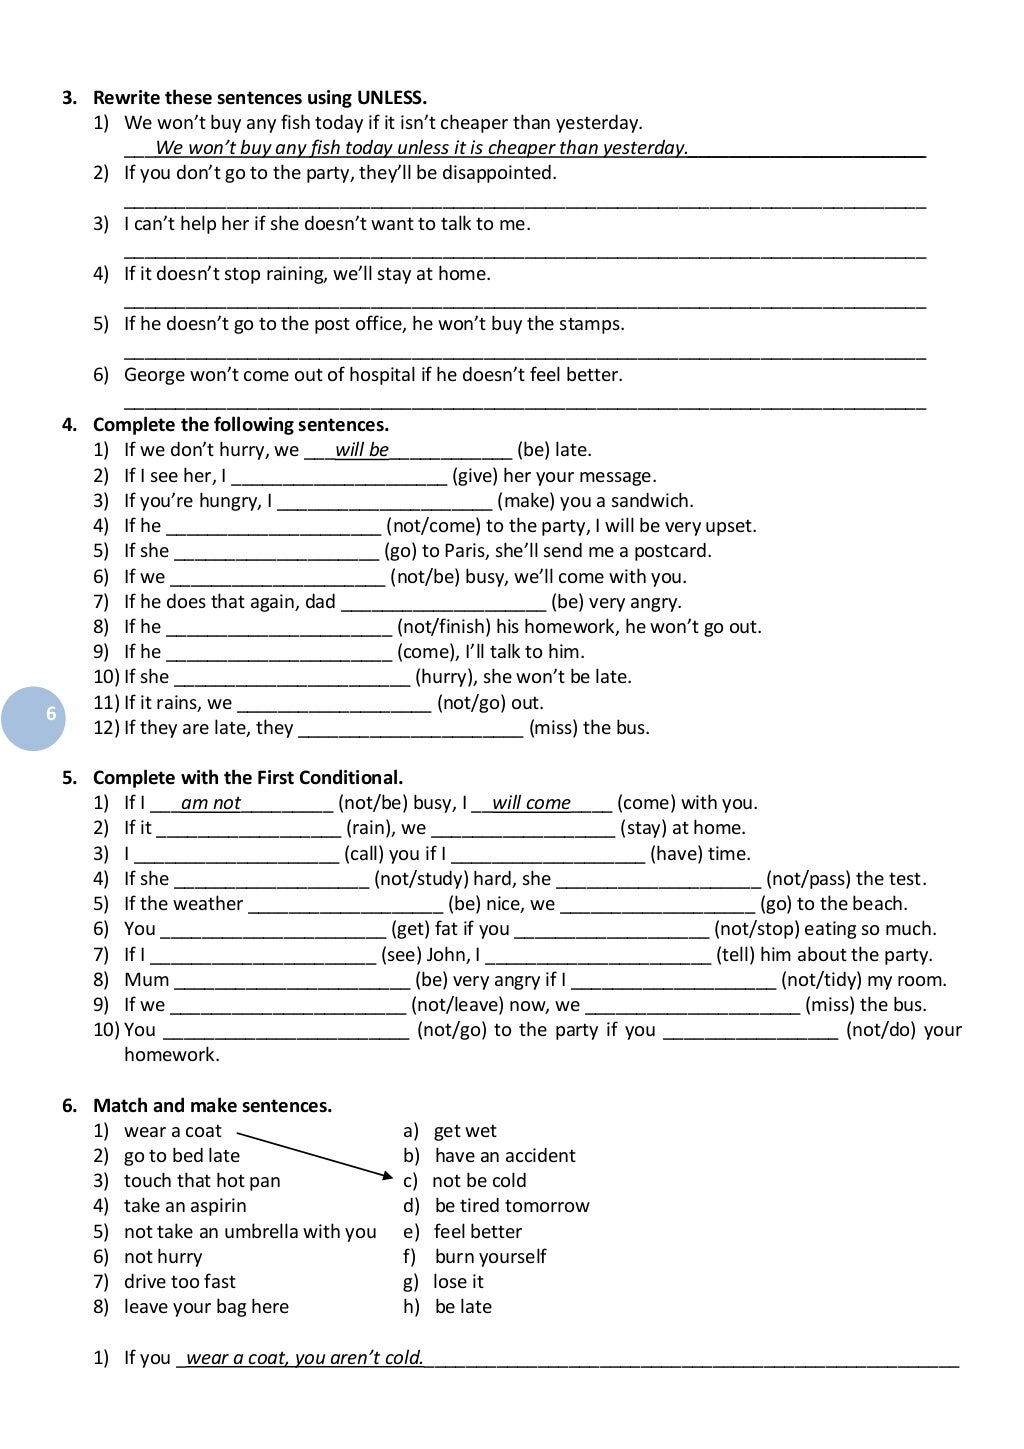 conditional-sentences-interactive-and-downloadable-worksheet-you-can-do-the-exercises-online-or